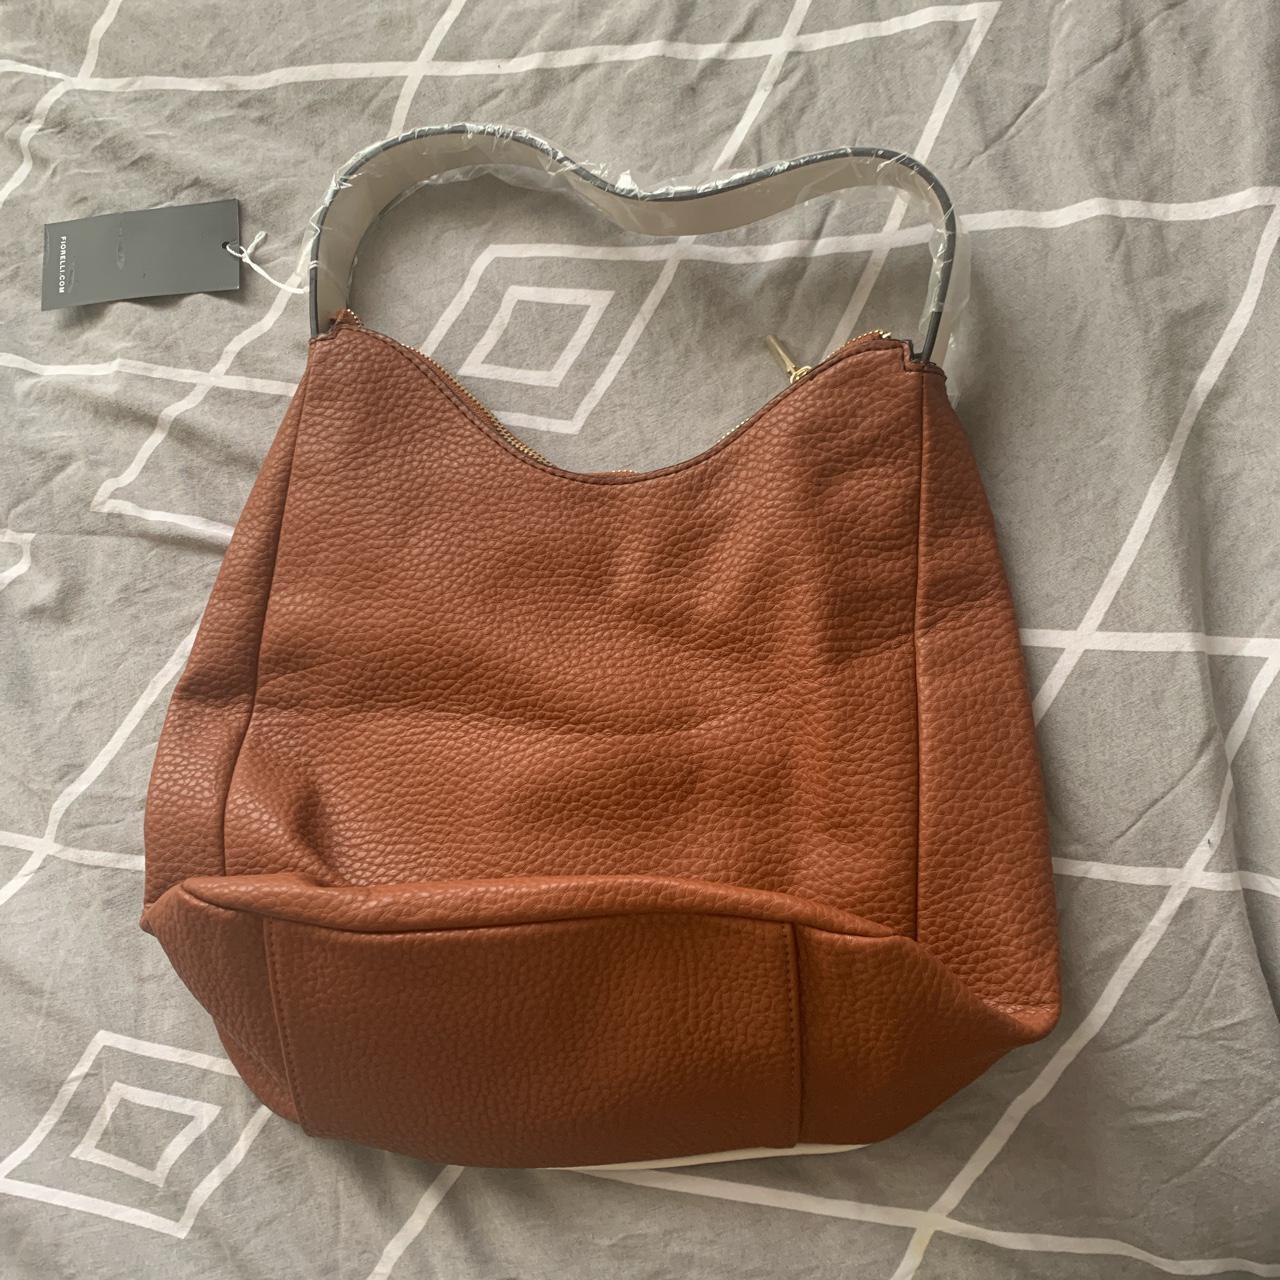 Product Image 2 - Fiorelli Bag 


Never used brand